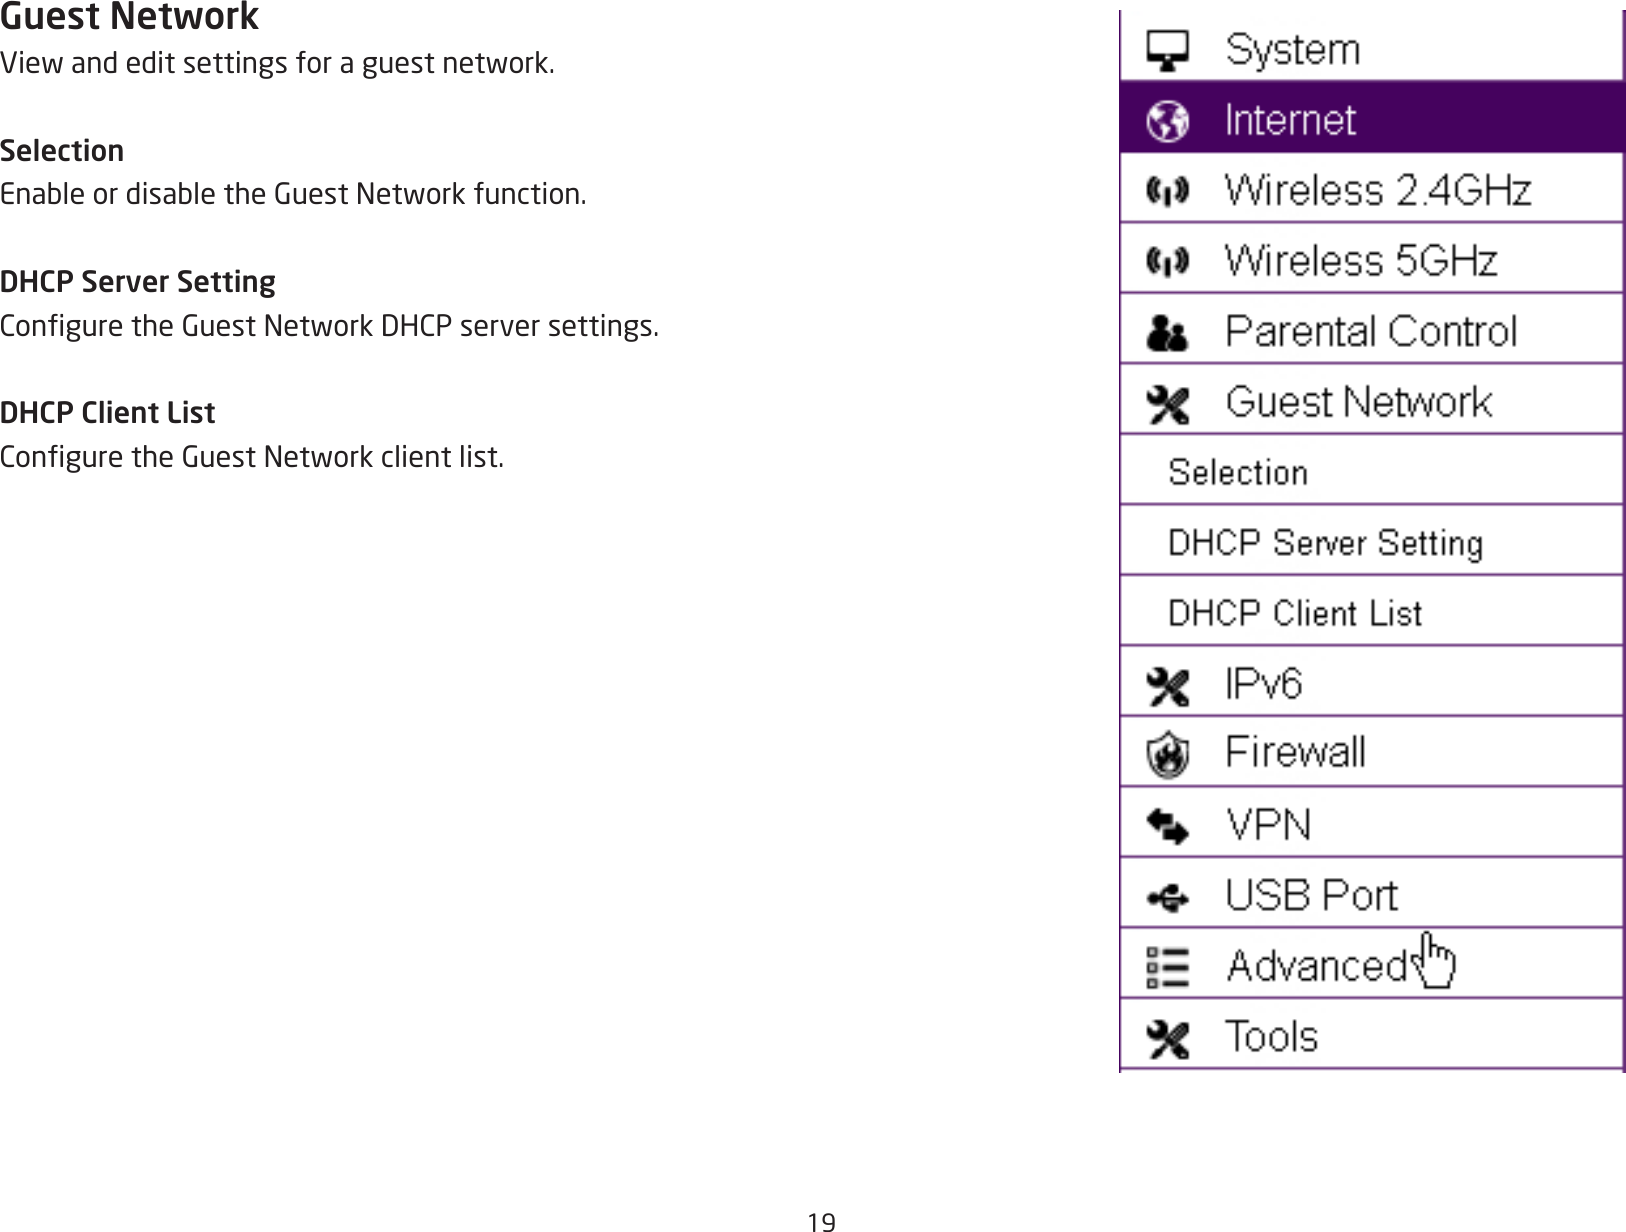 19Guest NetworkViewandeditsettingsforaguestnetwork.SelectionEnableordisabletheGuestNetworkfunction.DHCP Server SettingConguretheGuestNetworkDHCPserversettings.DHCP Client ListConguretheGuestNetworkclientlist.